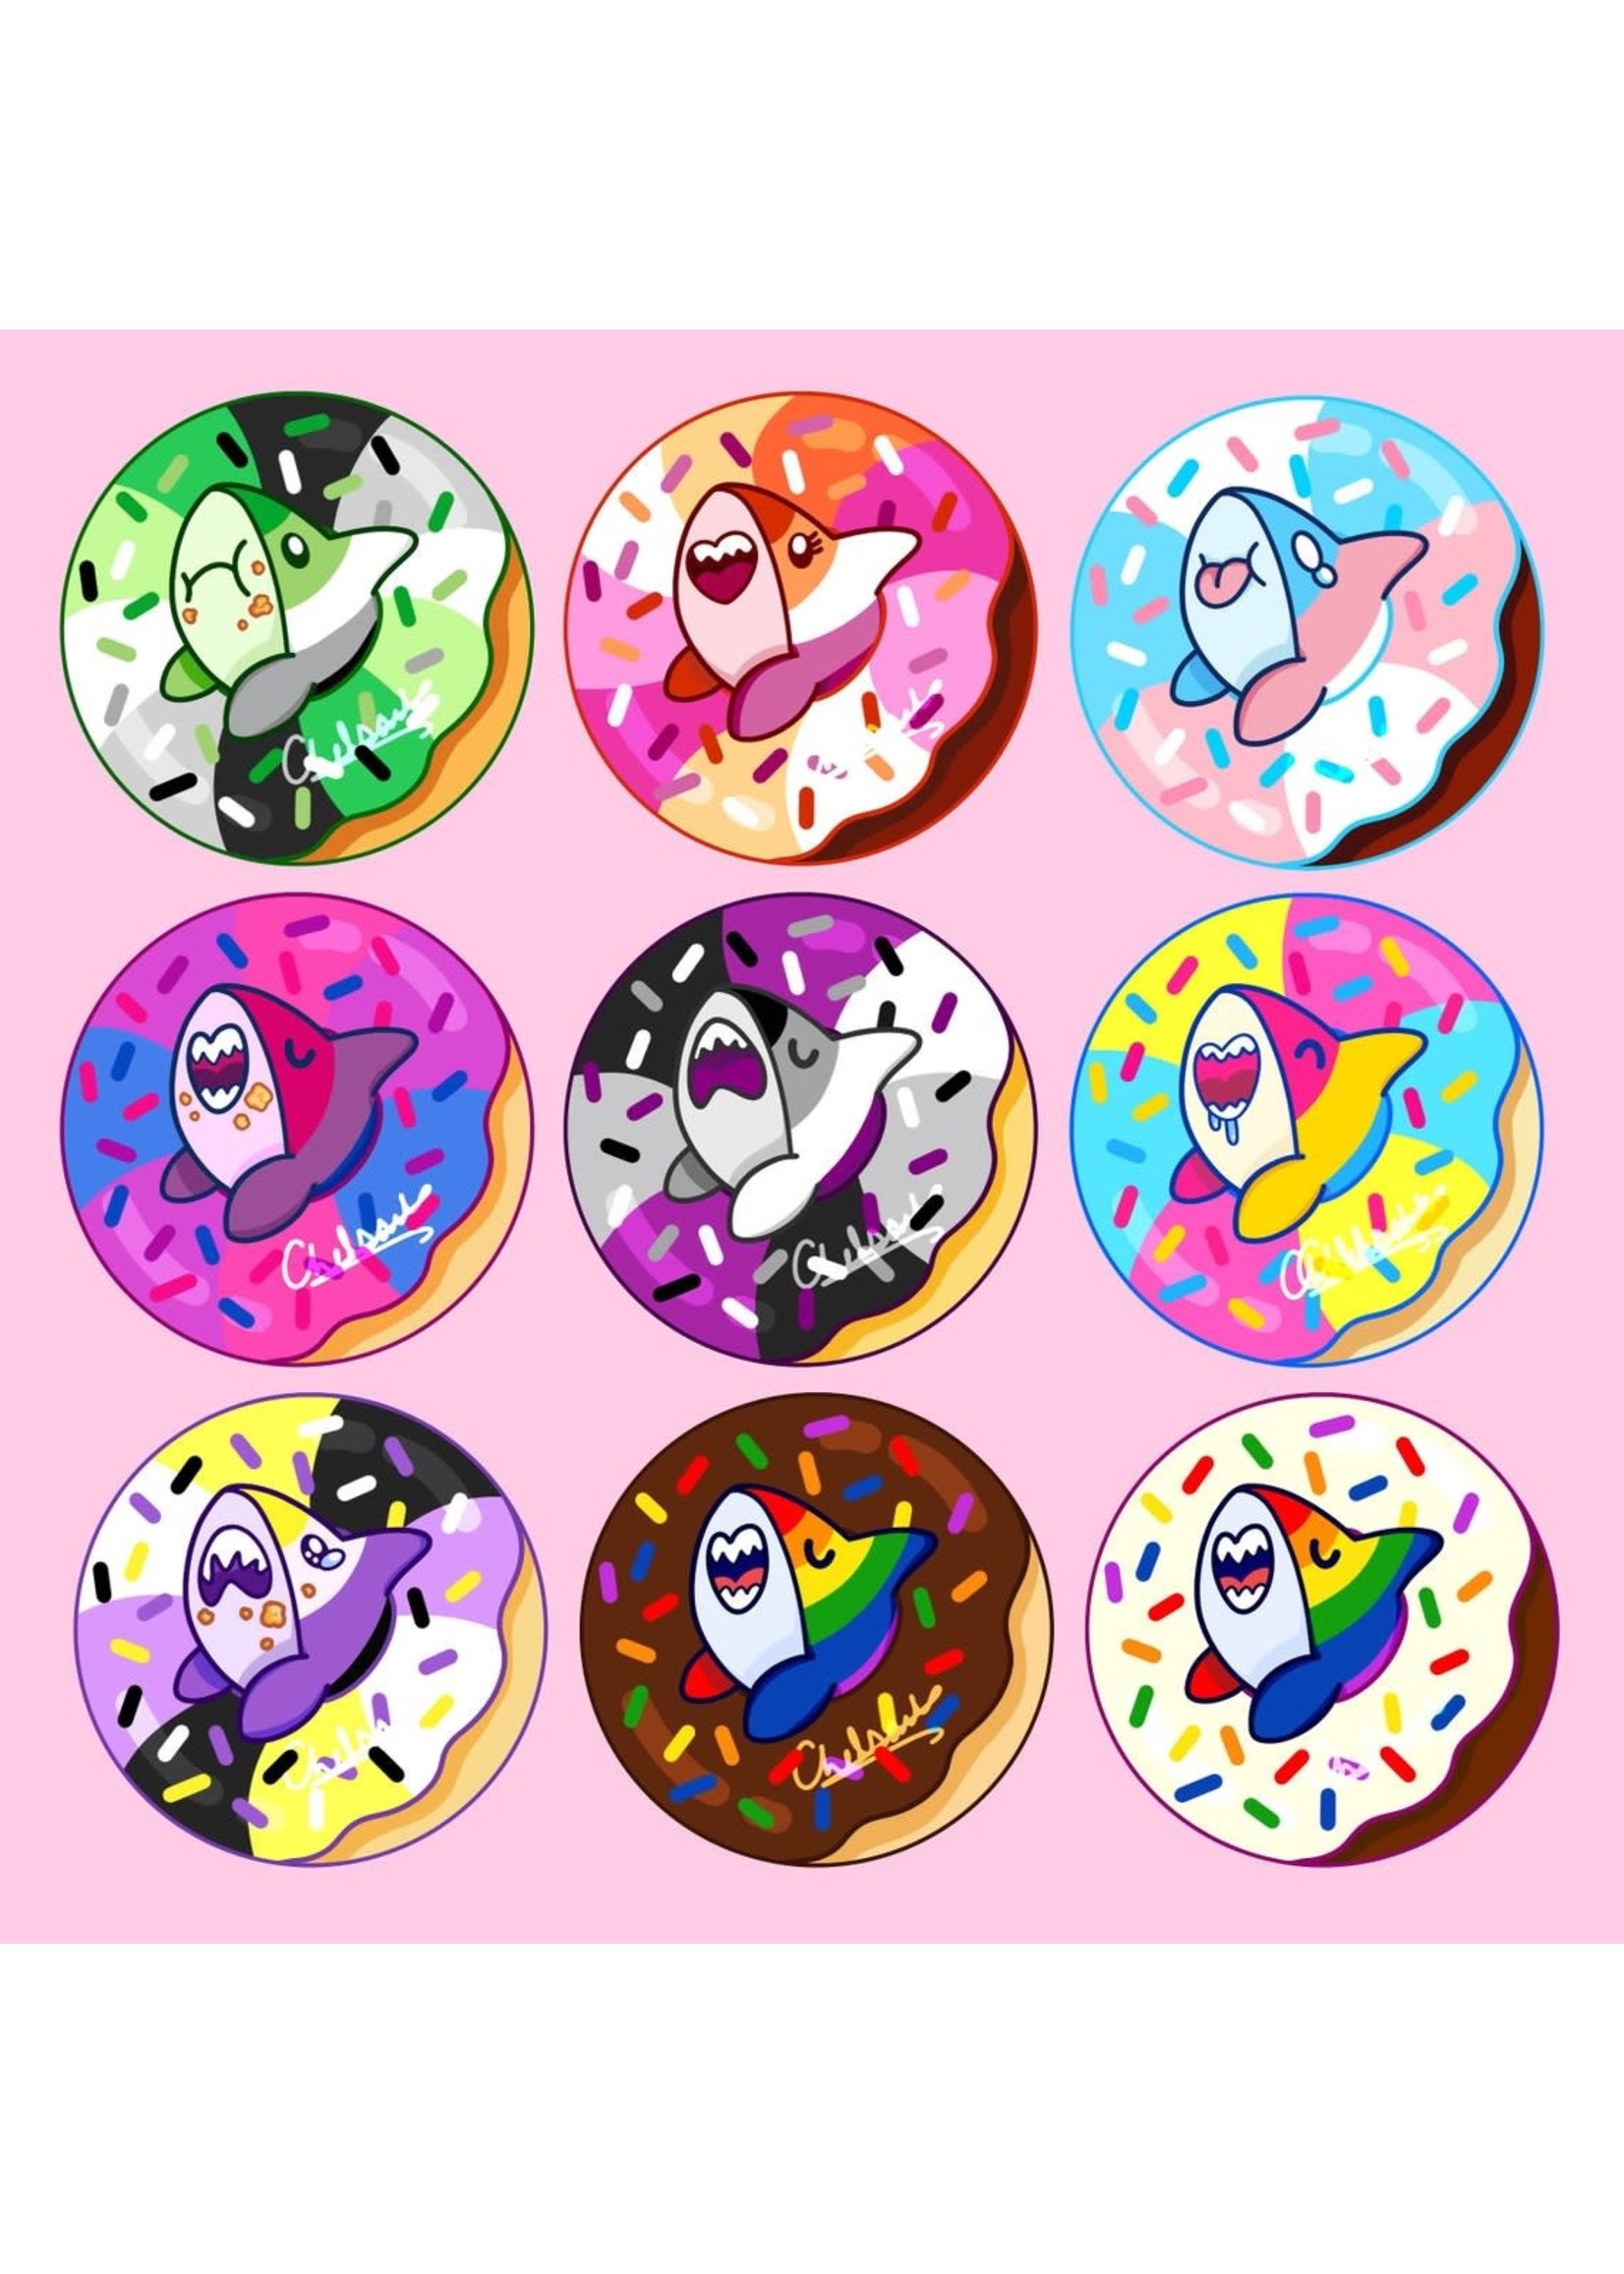 SHARKNDONUTS Pride Sharks and Donut Buttons Pride Chocolate